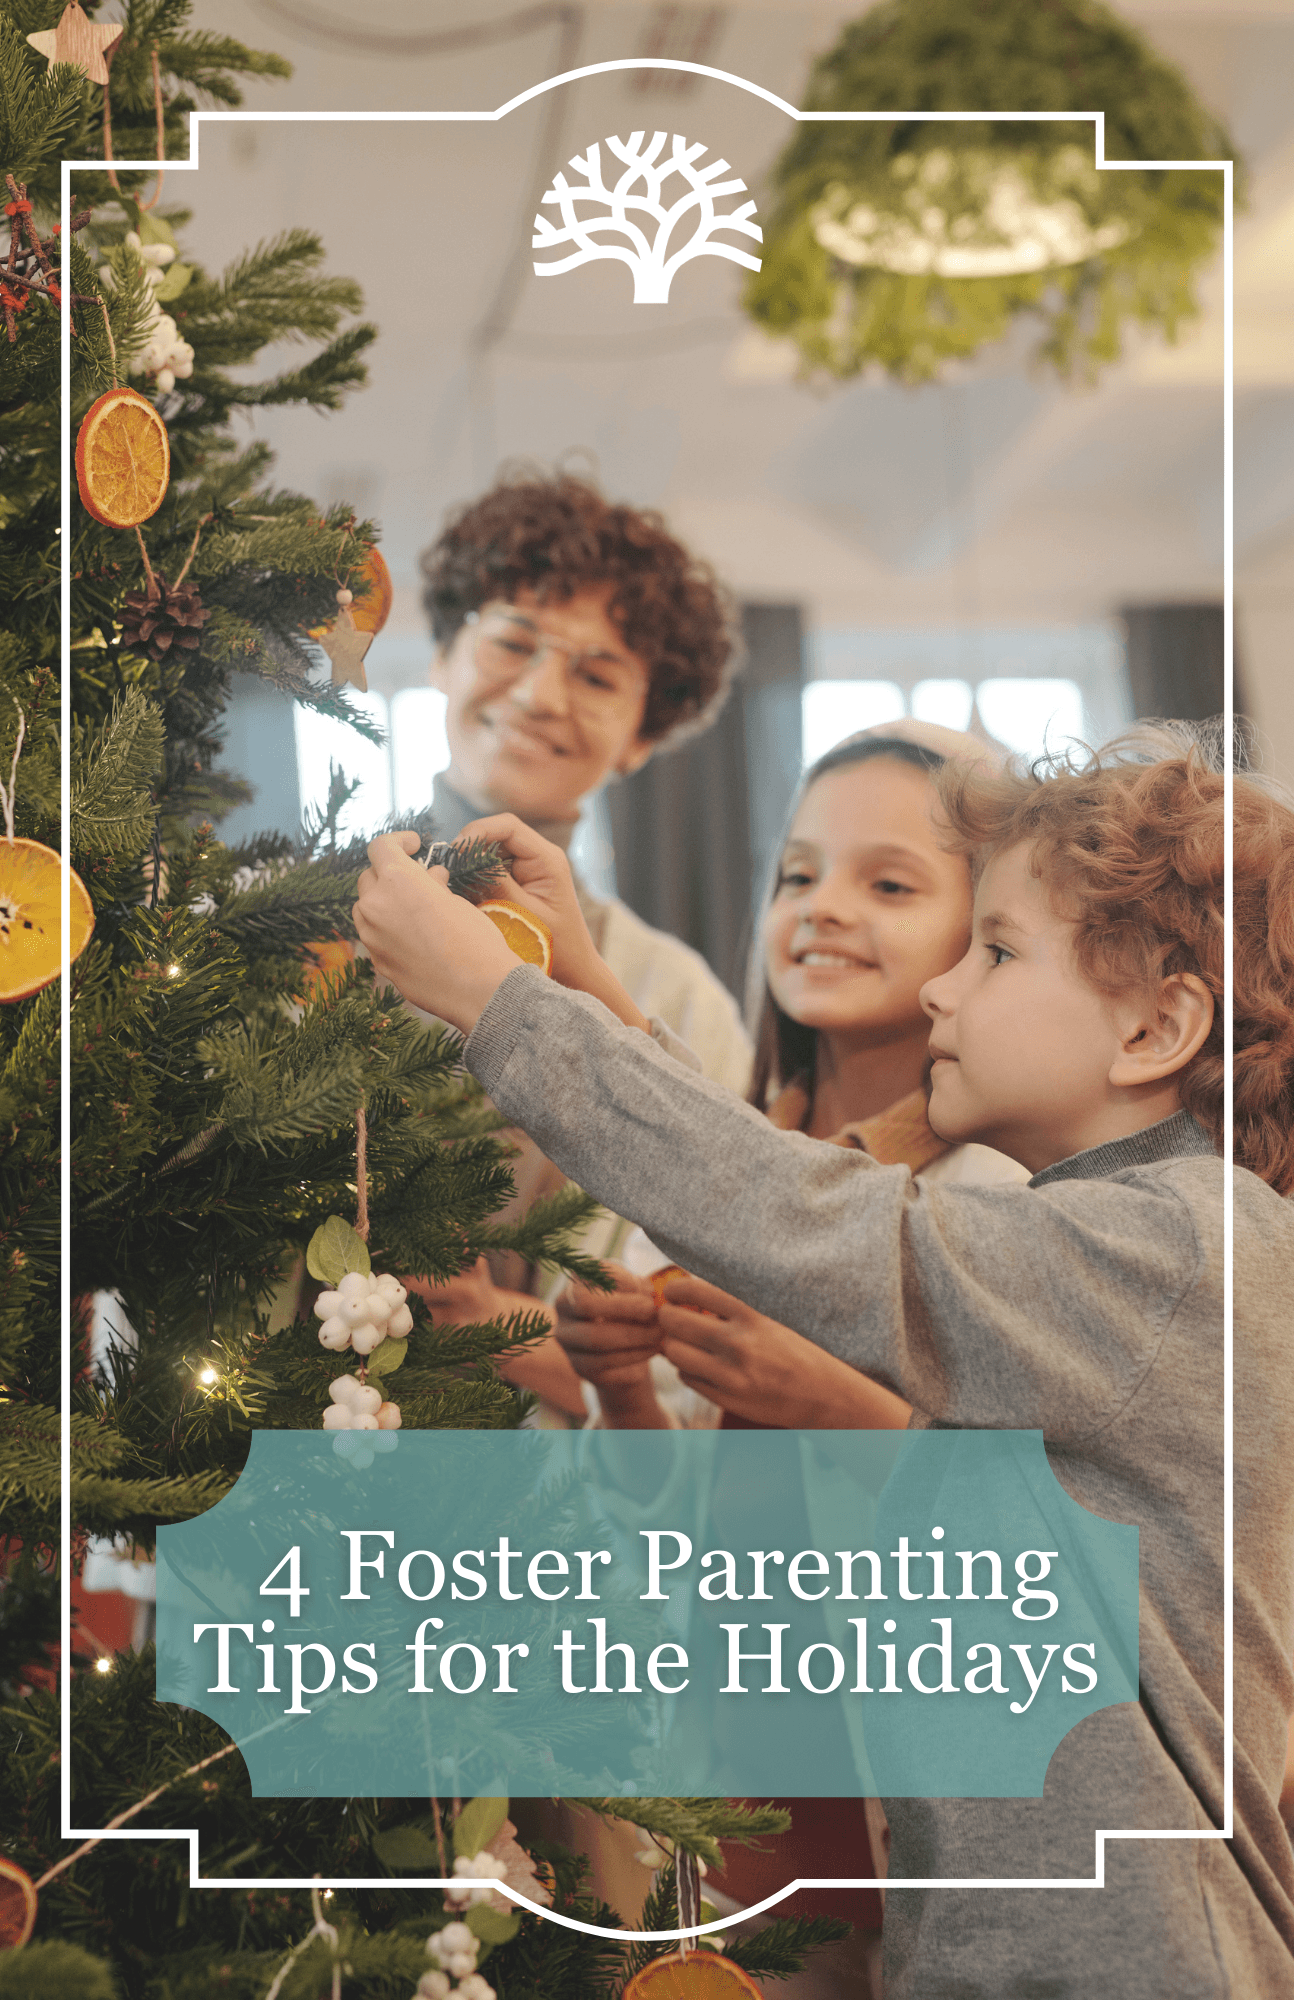 4 Foster Parenting Tips for the Holidays